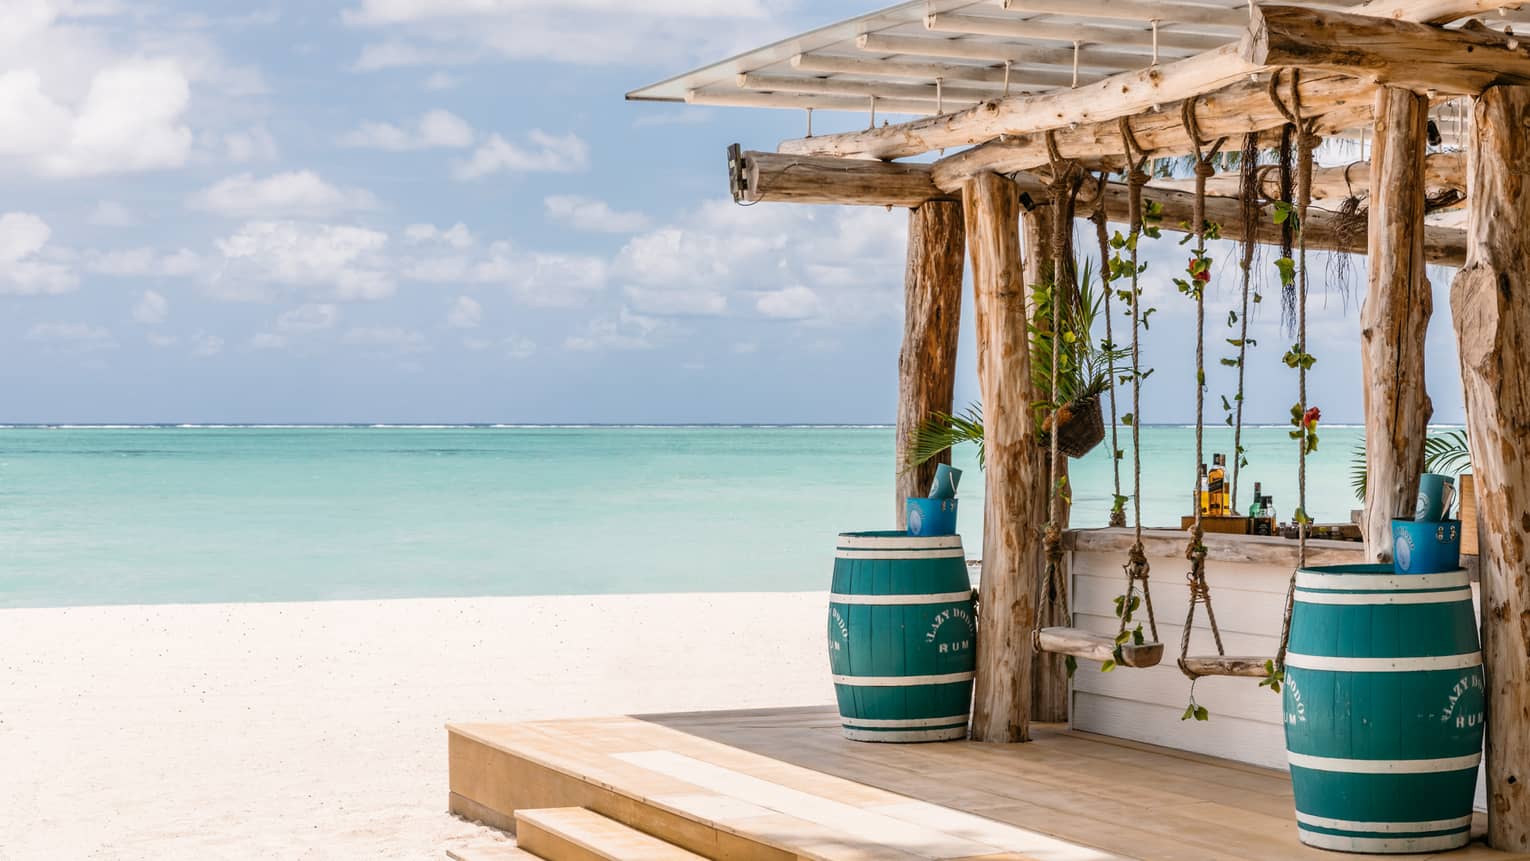 Wooden bar with pergola, two blue barrels, two swings on beach, aqua views, cloud dotted blue sky